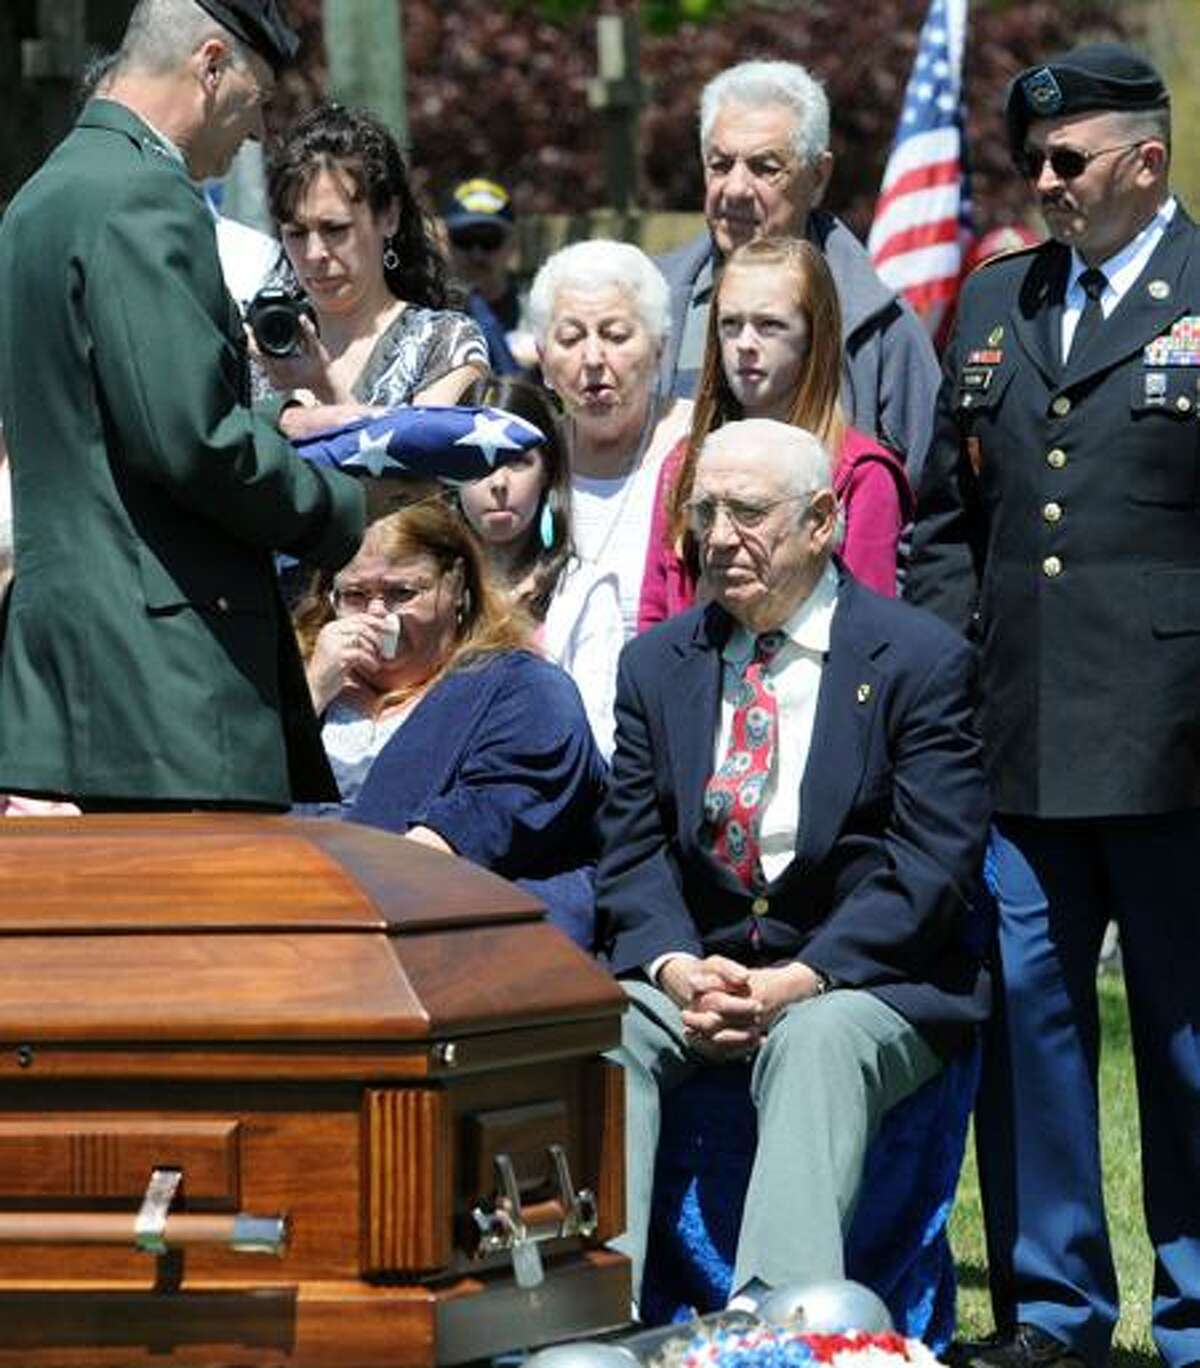 Korean War veteran Primo Carnabuci, who was missing in action and whose remains just recently were repatriated, is laid to rest Thursday at St. Mary's Cemetery in Clinton following a funeral in Old Saybrook. His brother, Dominic Carbanuci, right, and daughter, Ruth, second from right, receive an American flag from Army National Guard Brig. Gen. Steven Scorzato. Mara Lavitt/Register